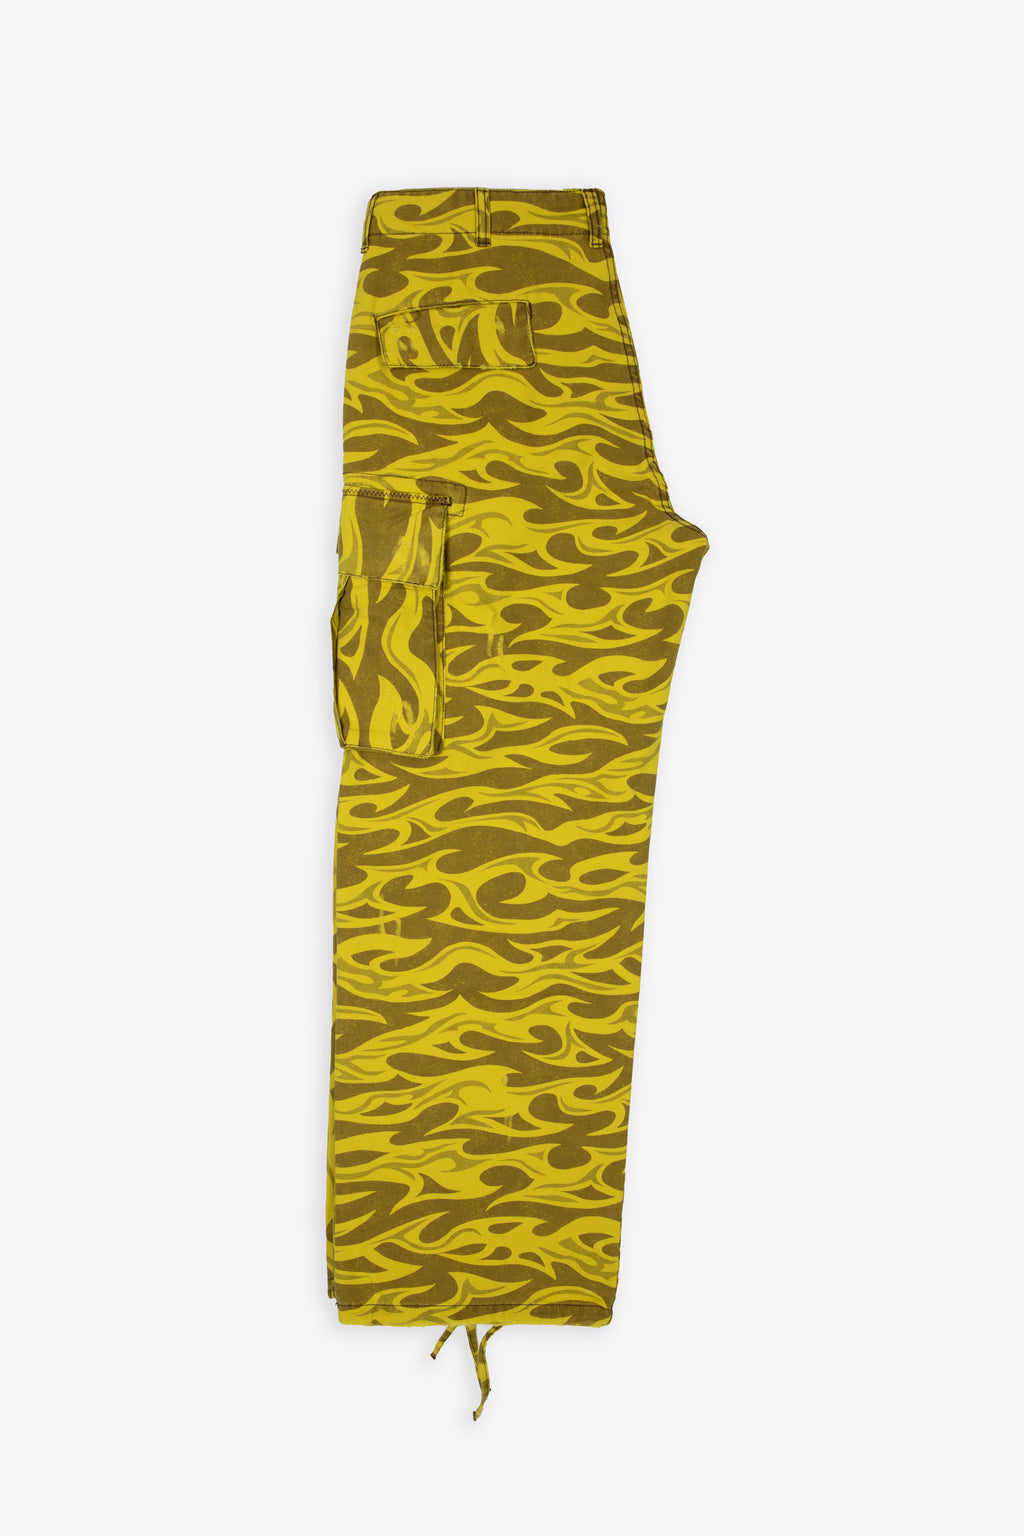 alt-image__Yellow-canvas-printed-cargo-pant---Unisex-Printed-Cargo-Pants-Woven-